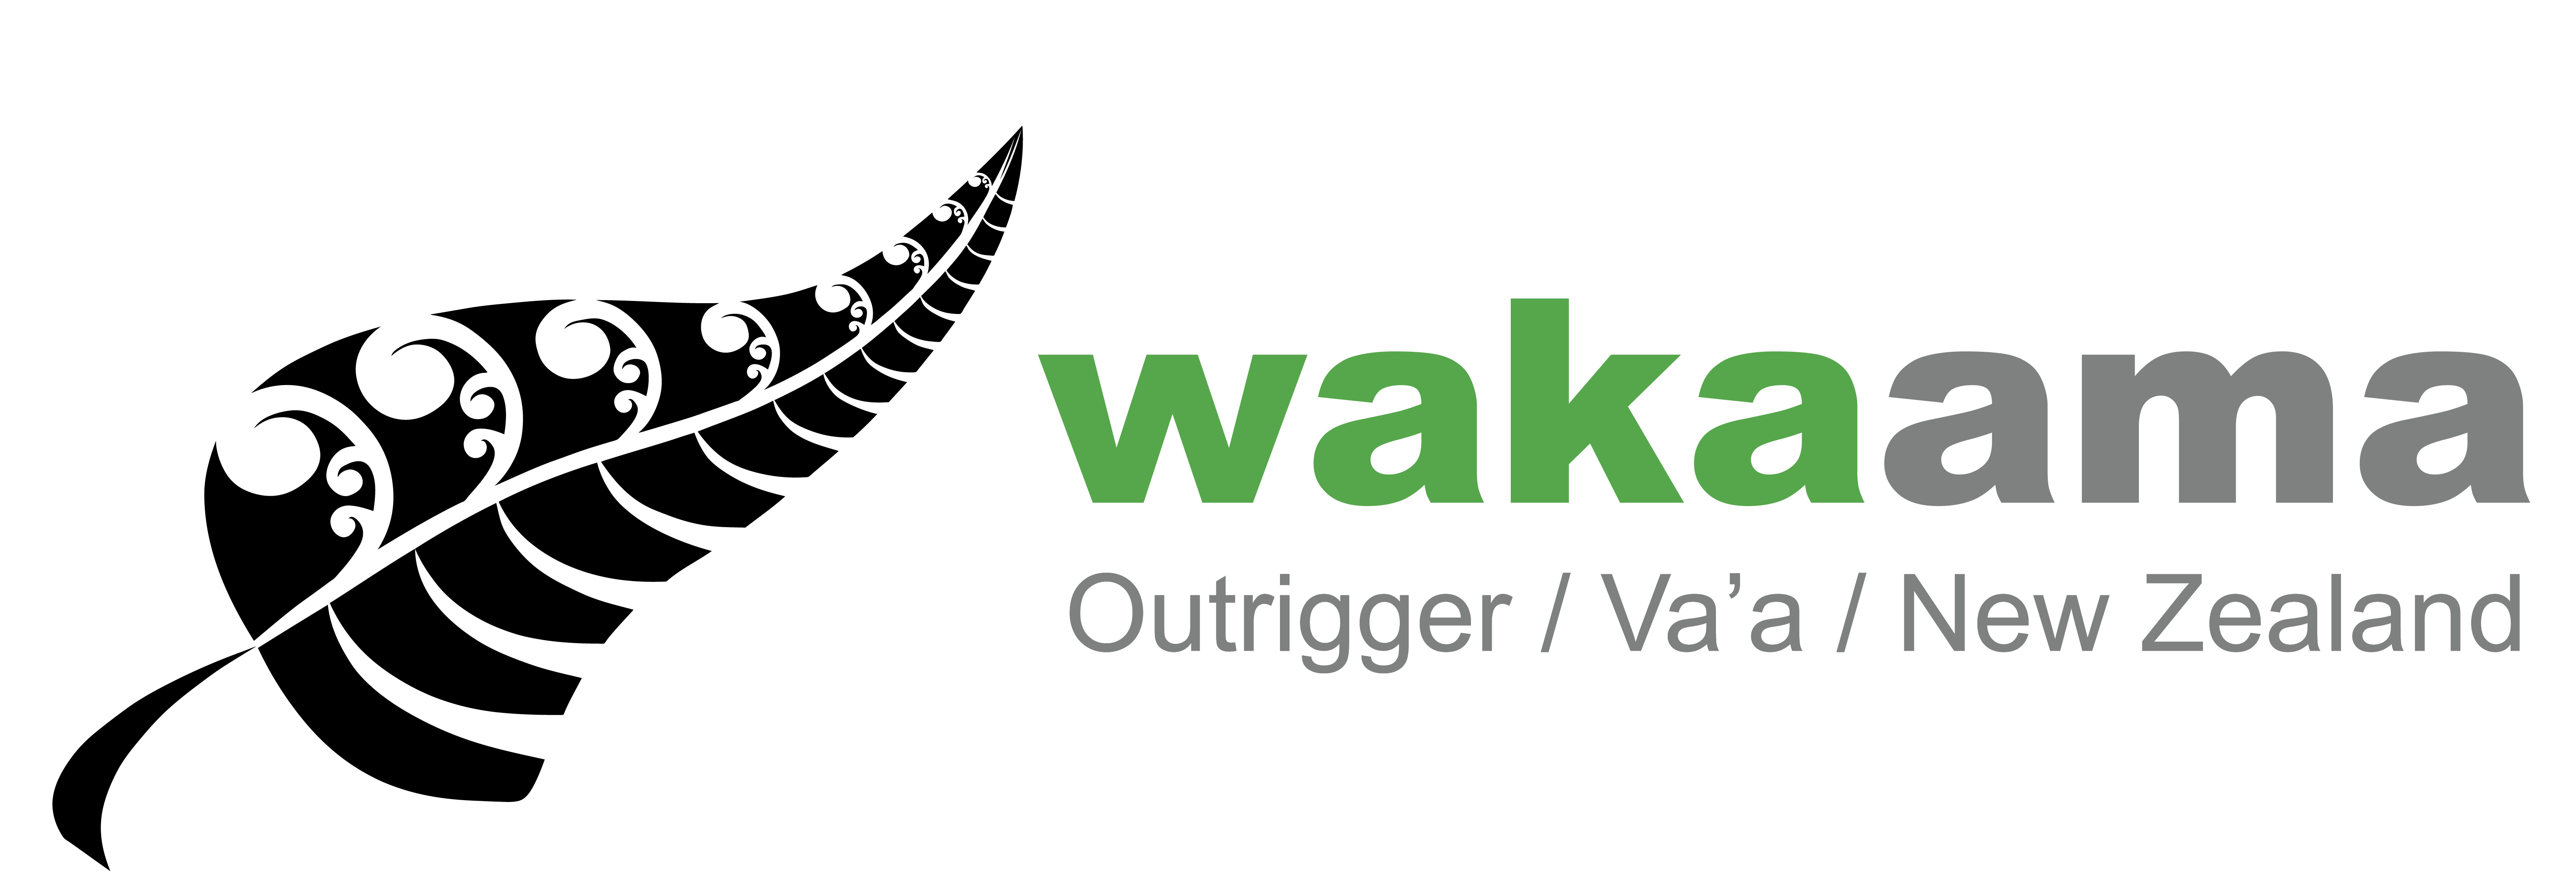 REMINDER: Voting for Waka Ama New Zealand Elected Board member position